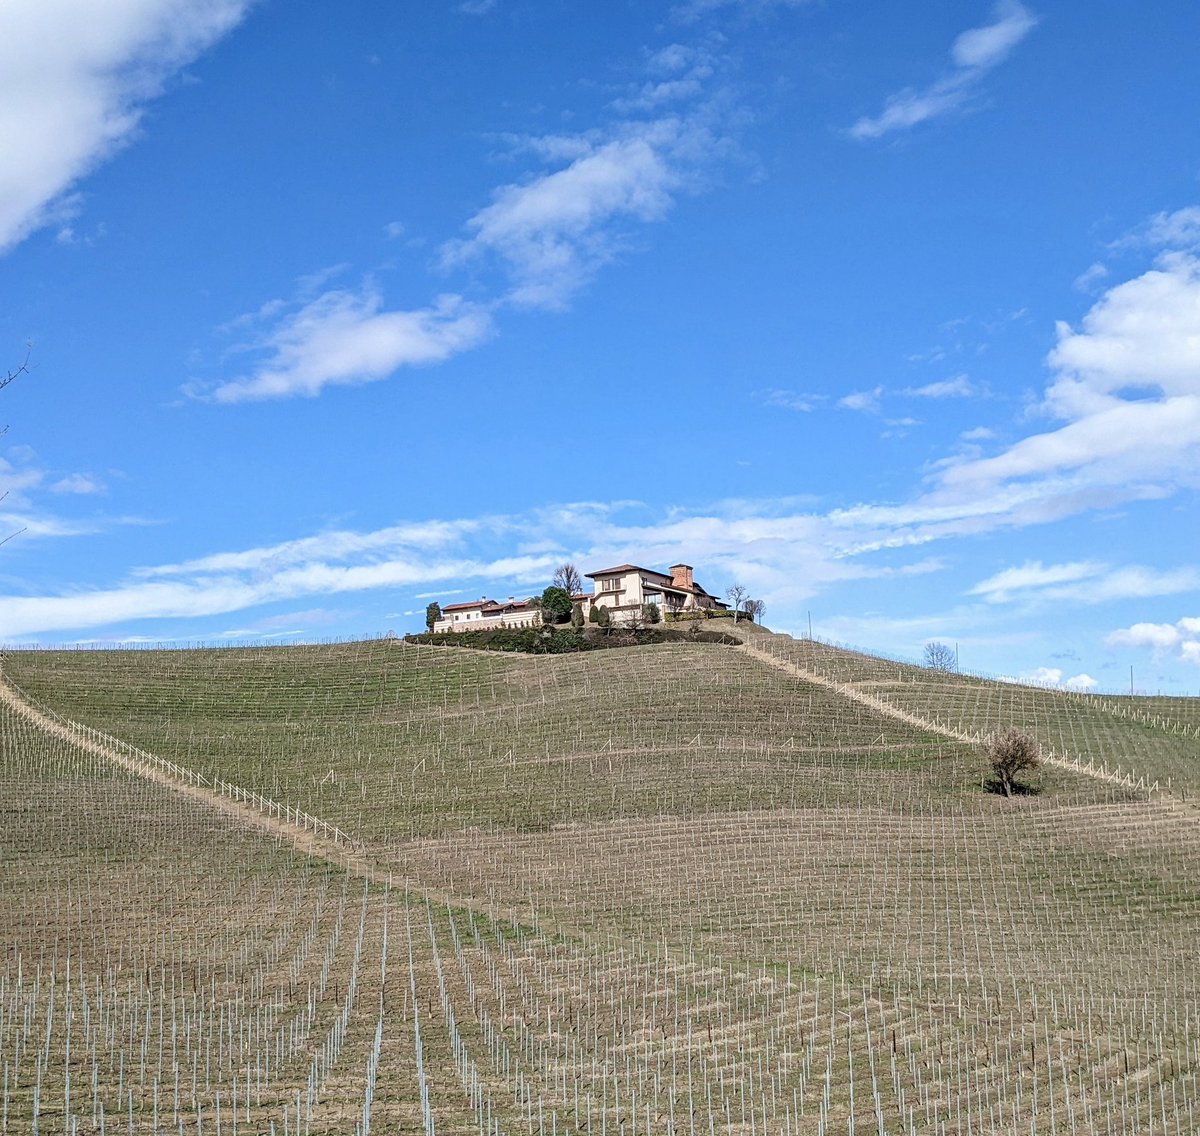 The majestic Cascina Nuova, 380 meters high, watches the Nebbiolo vines of Ravera as the almond tree blossoms gracefully.... An enchanting and inspiring view that celebrates the beauty of nature and the passion for wine. #elviocogno #cascinanuova